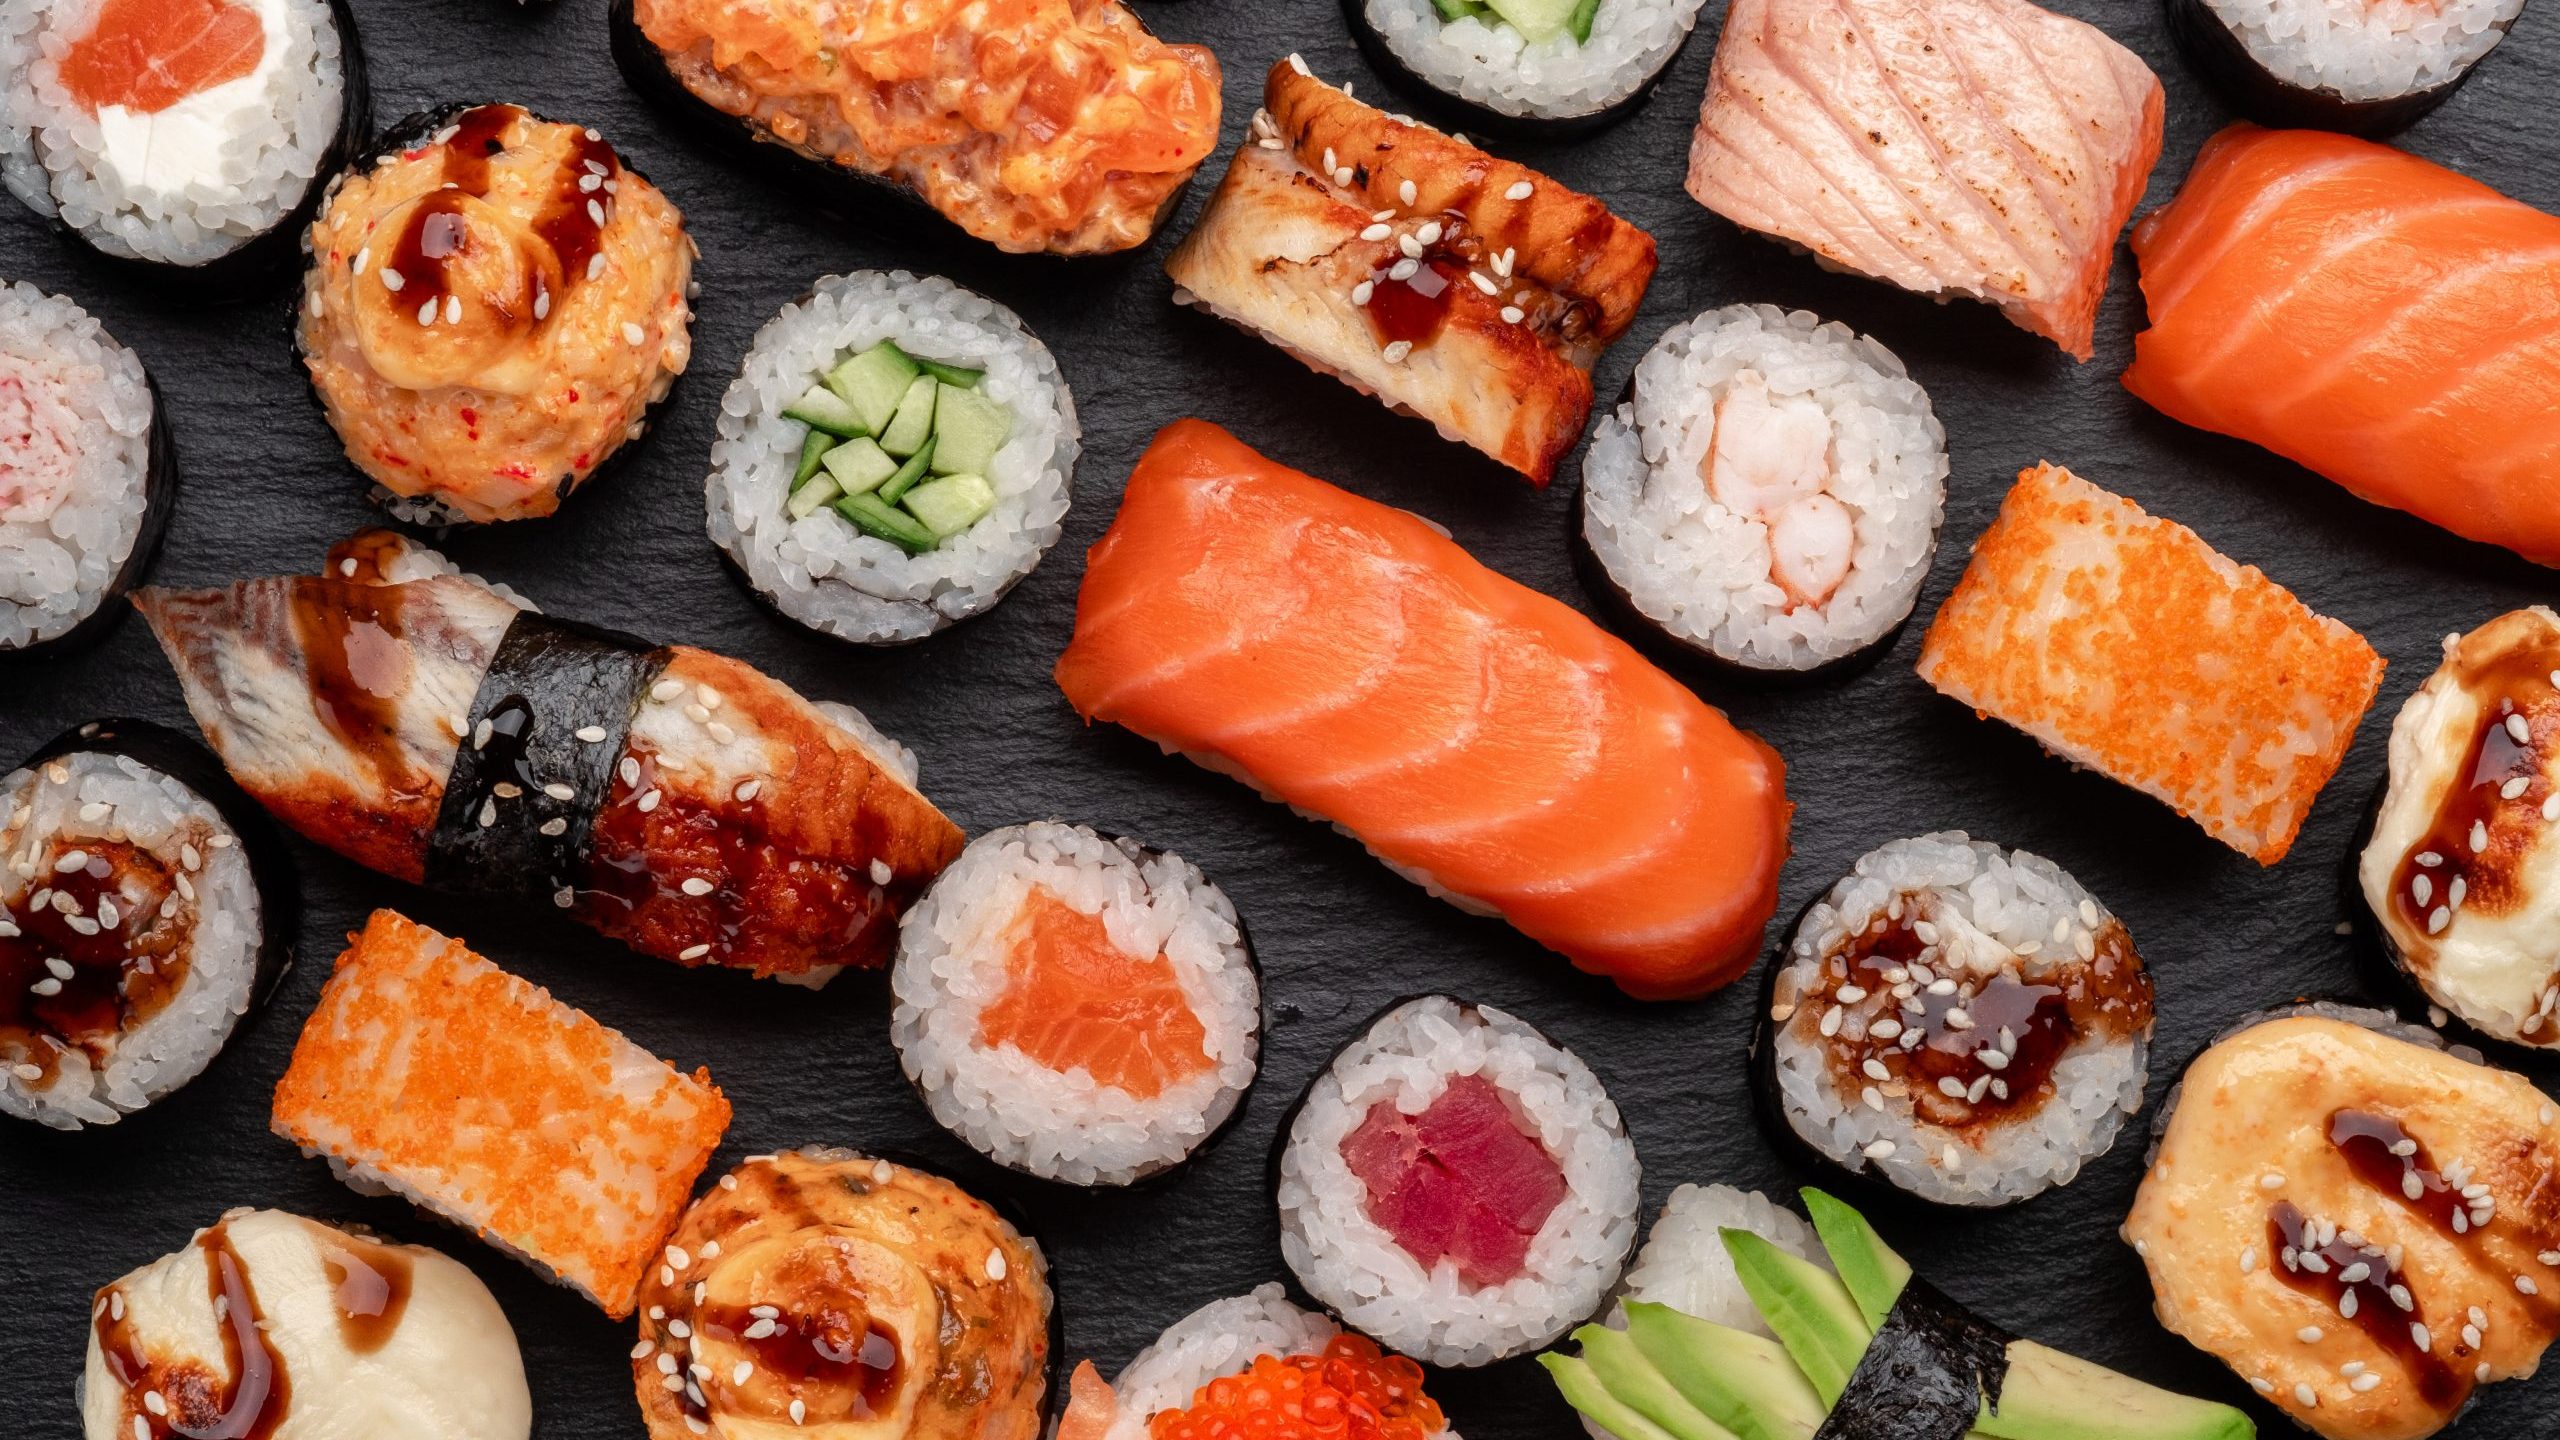 A variety of sushi.